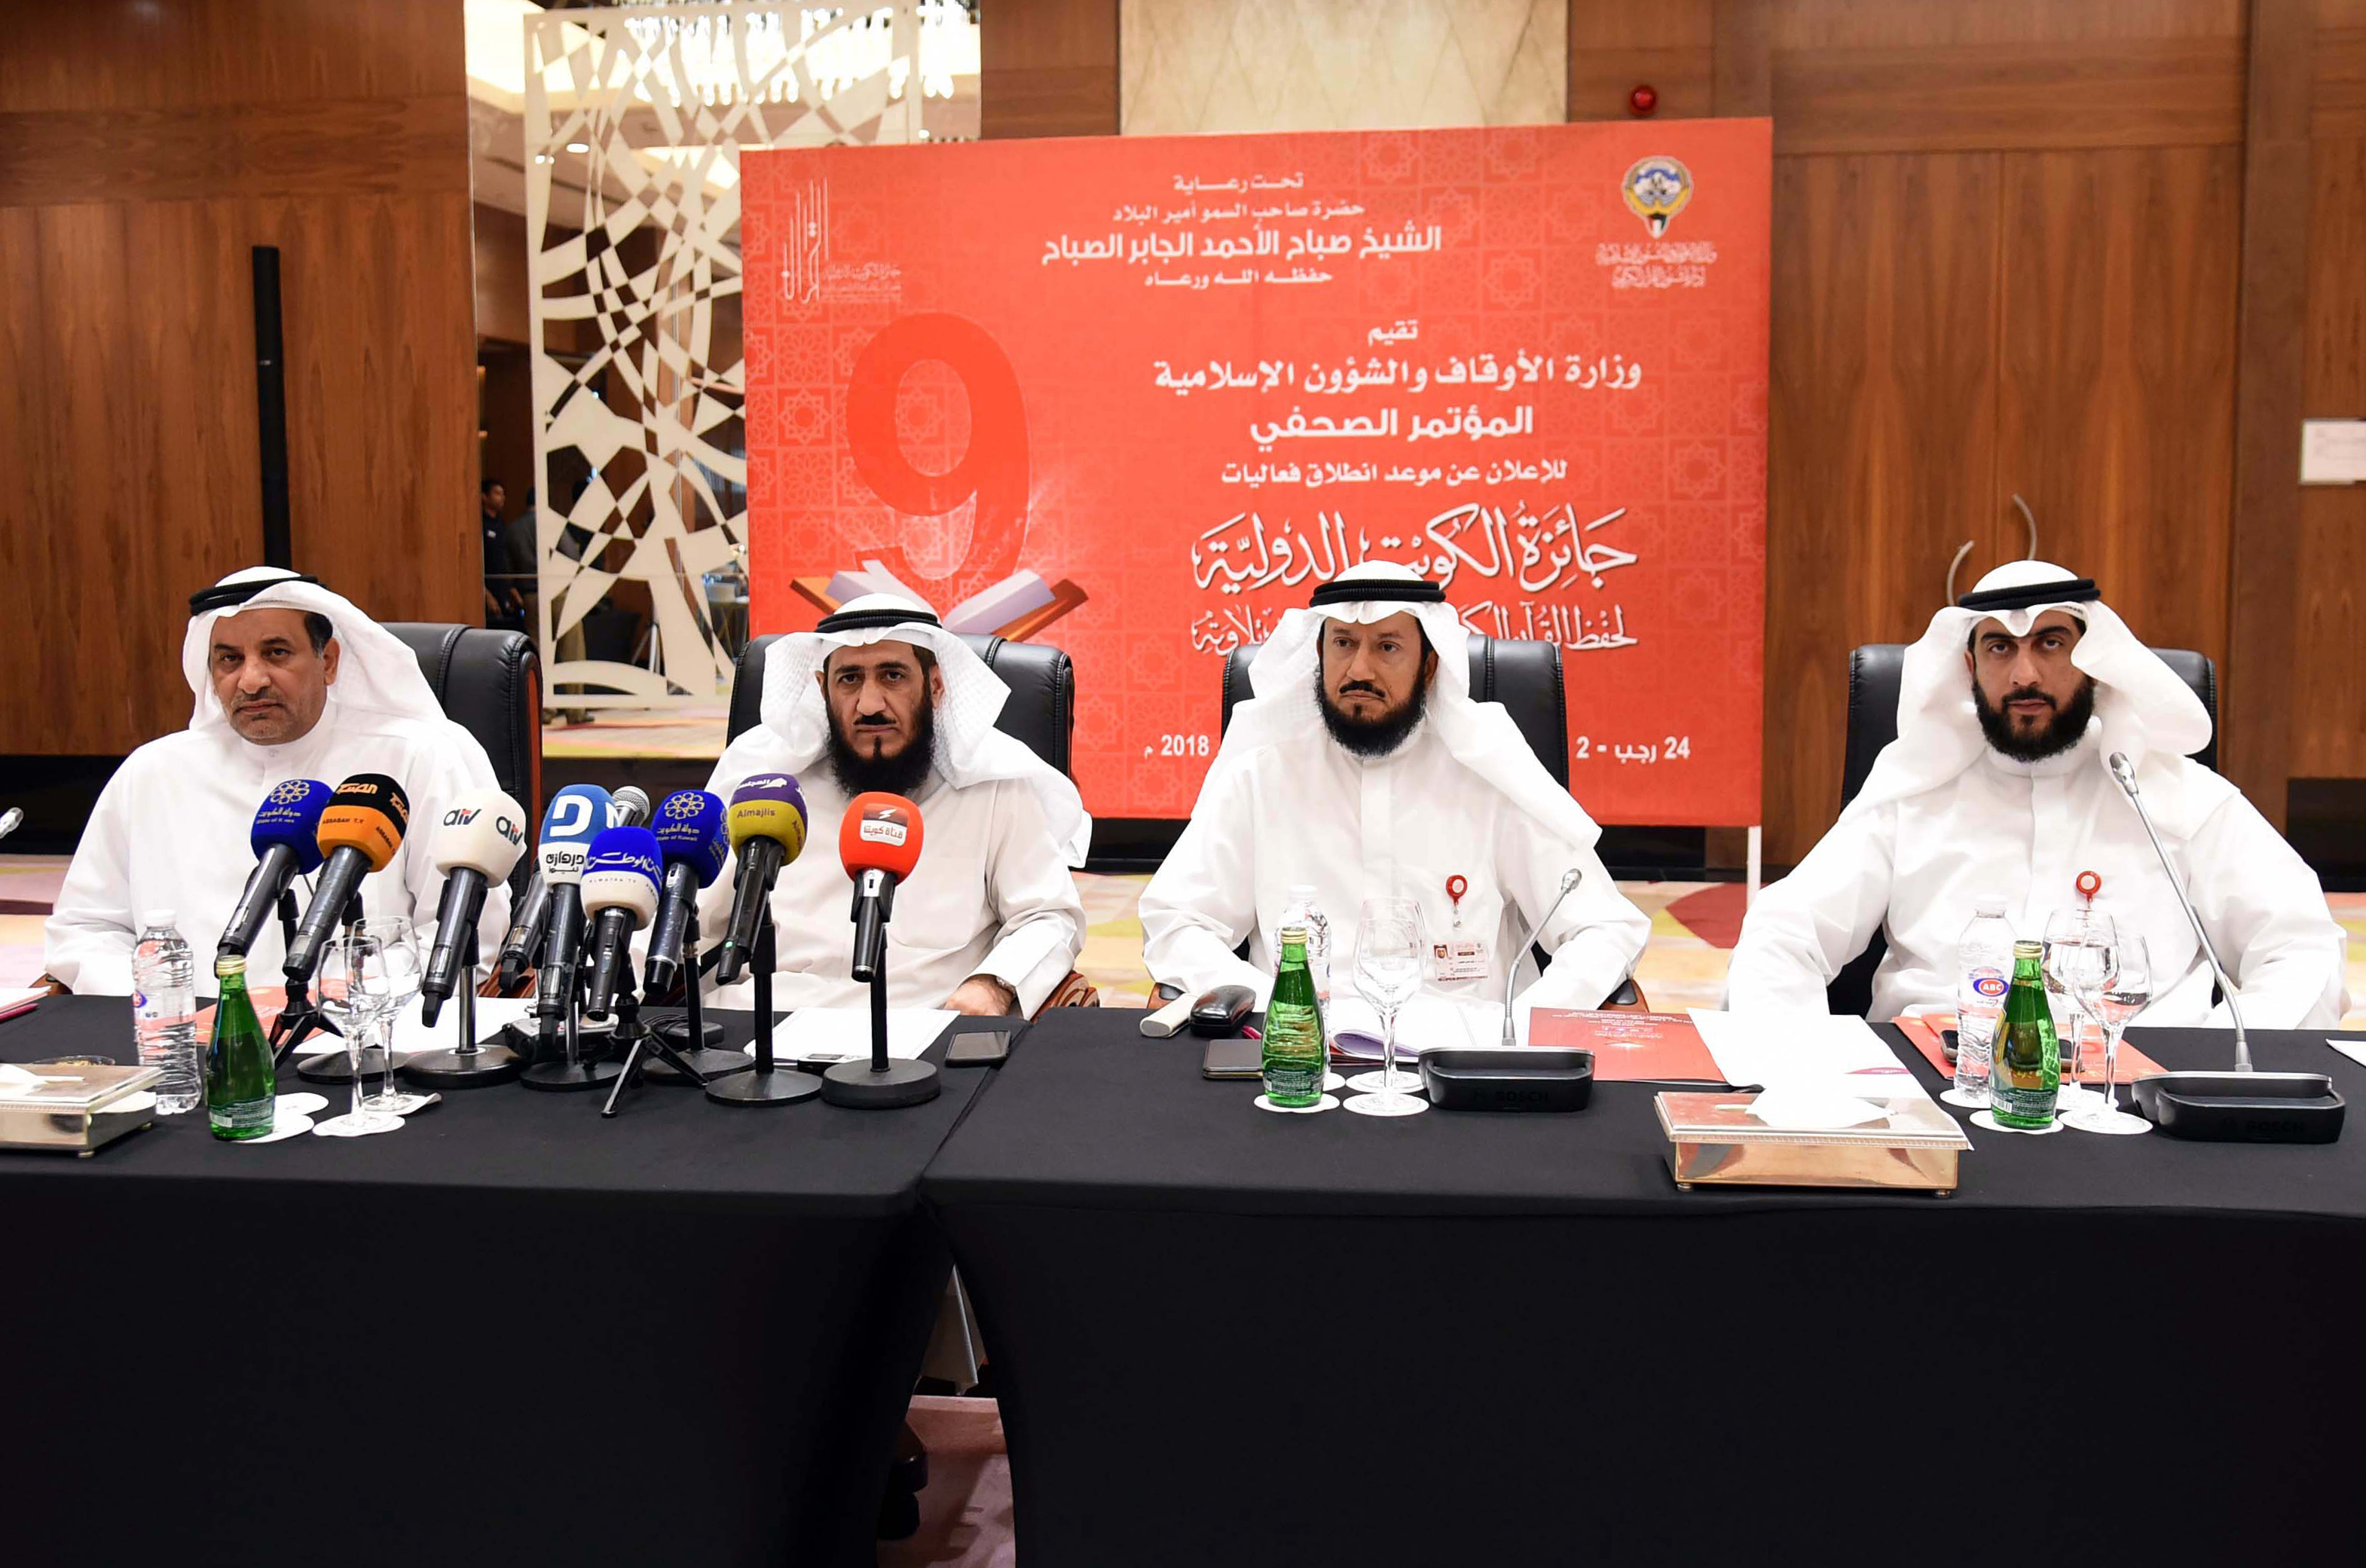 Undersecretary of the Ministry of Awqaf and Islamic Affairs Farid Emadi during the press conference to announce Kuwait International Award for Memorizing the Quran